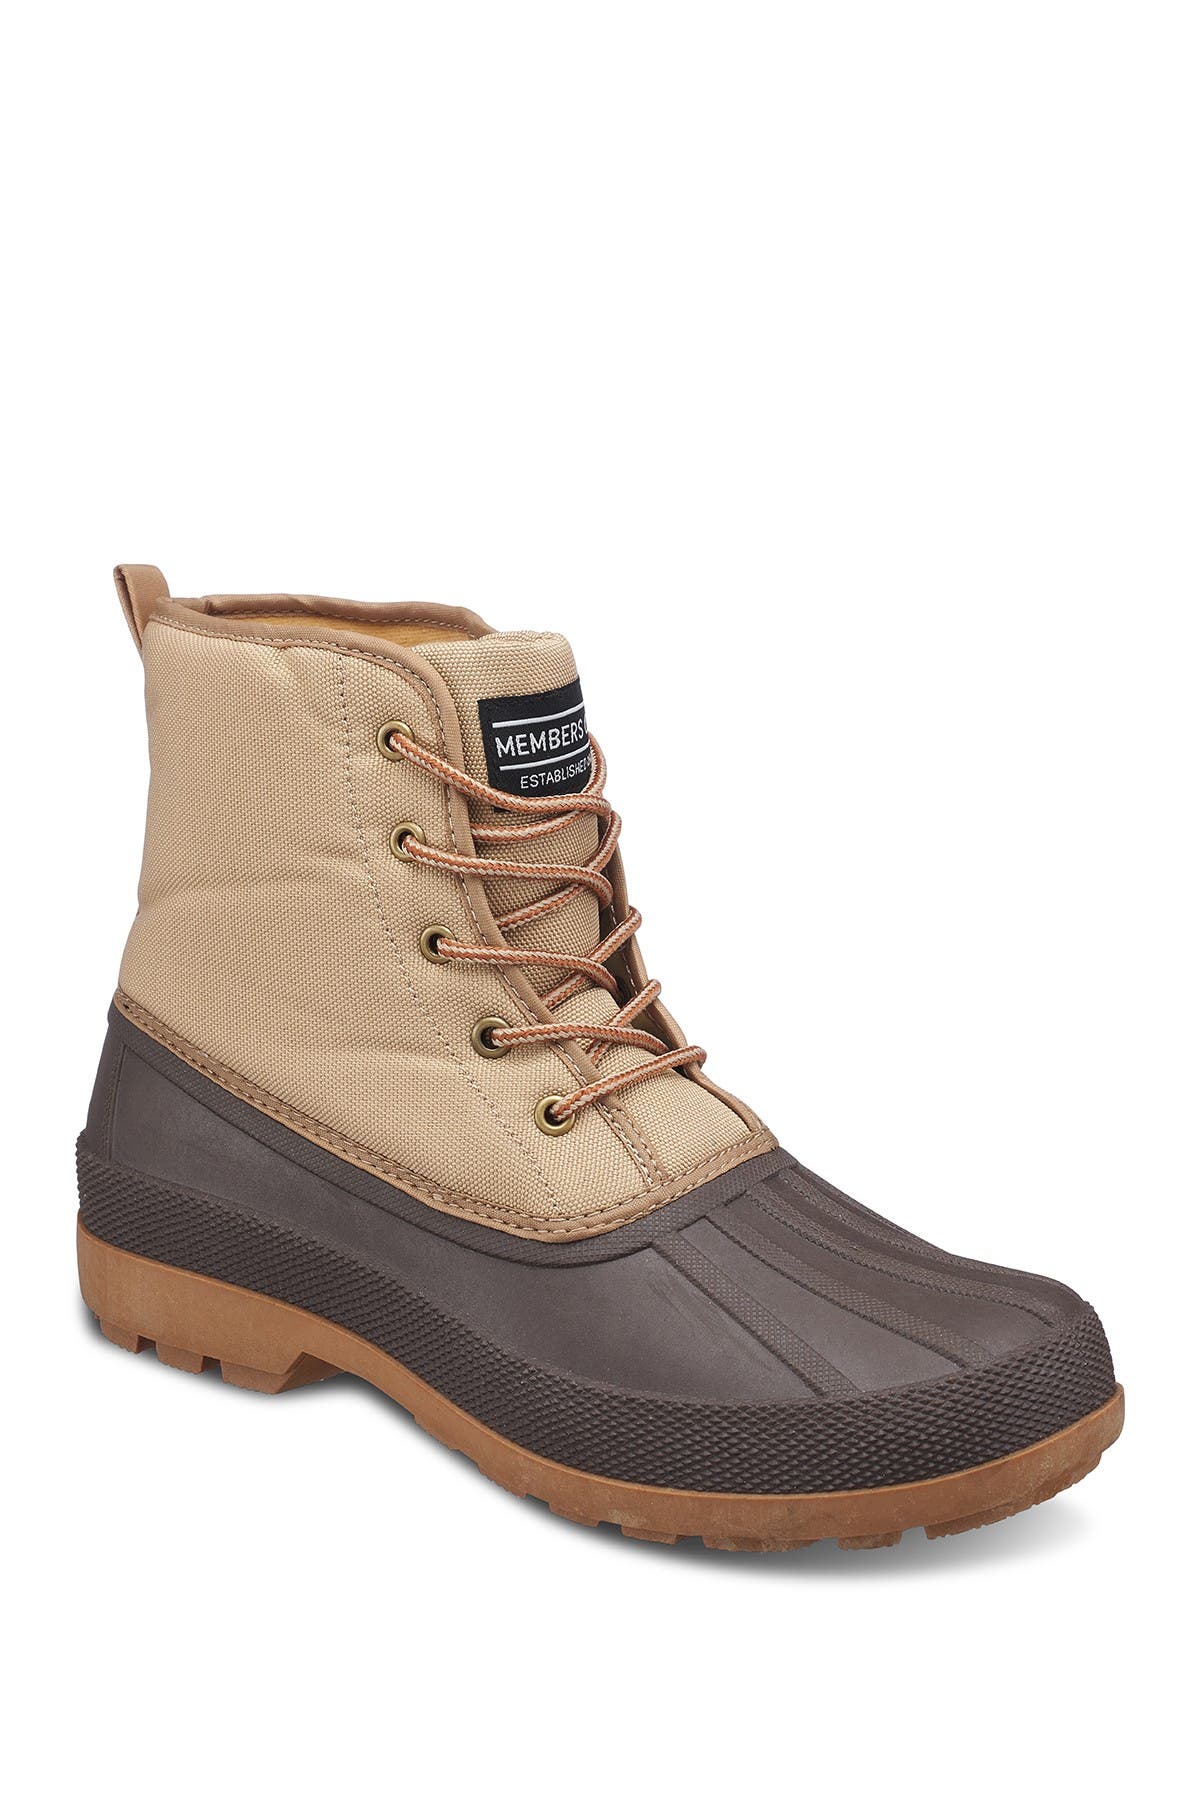 All-Weather Snow Duck Boot 